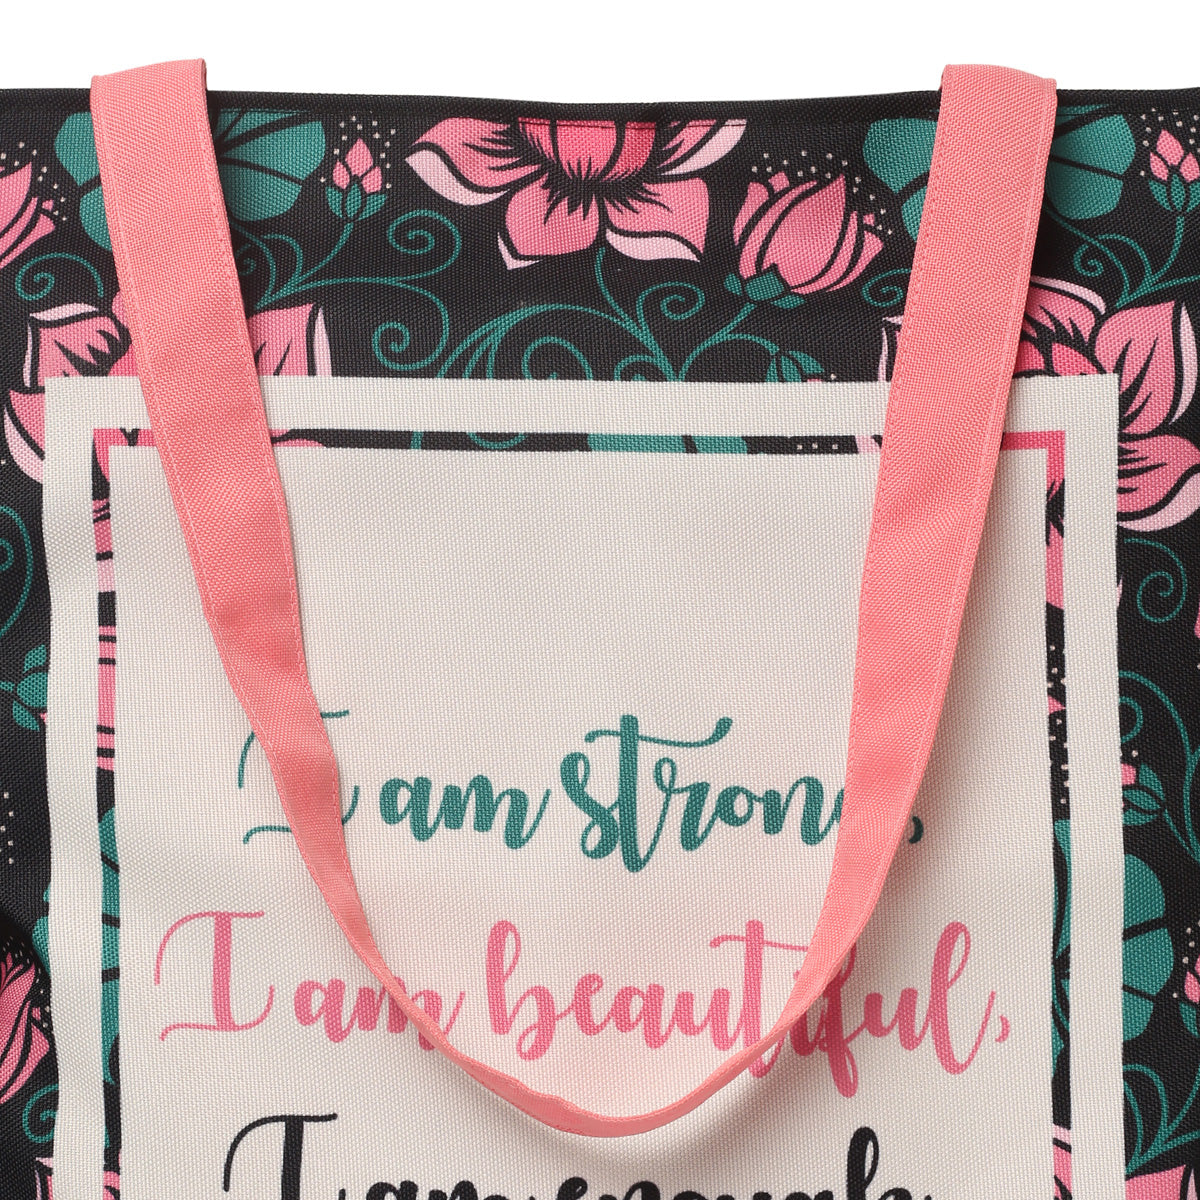 A tote bag with the quote "I am strong, I am beautiful, I am strong" on it.